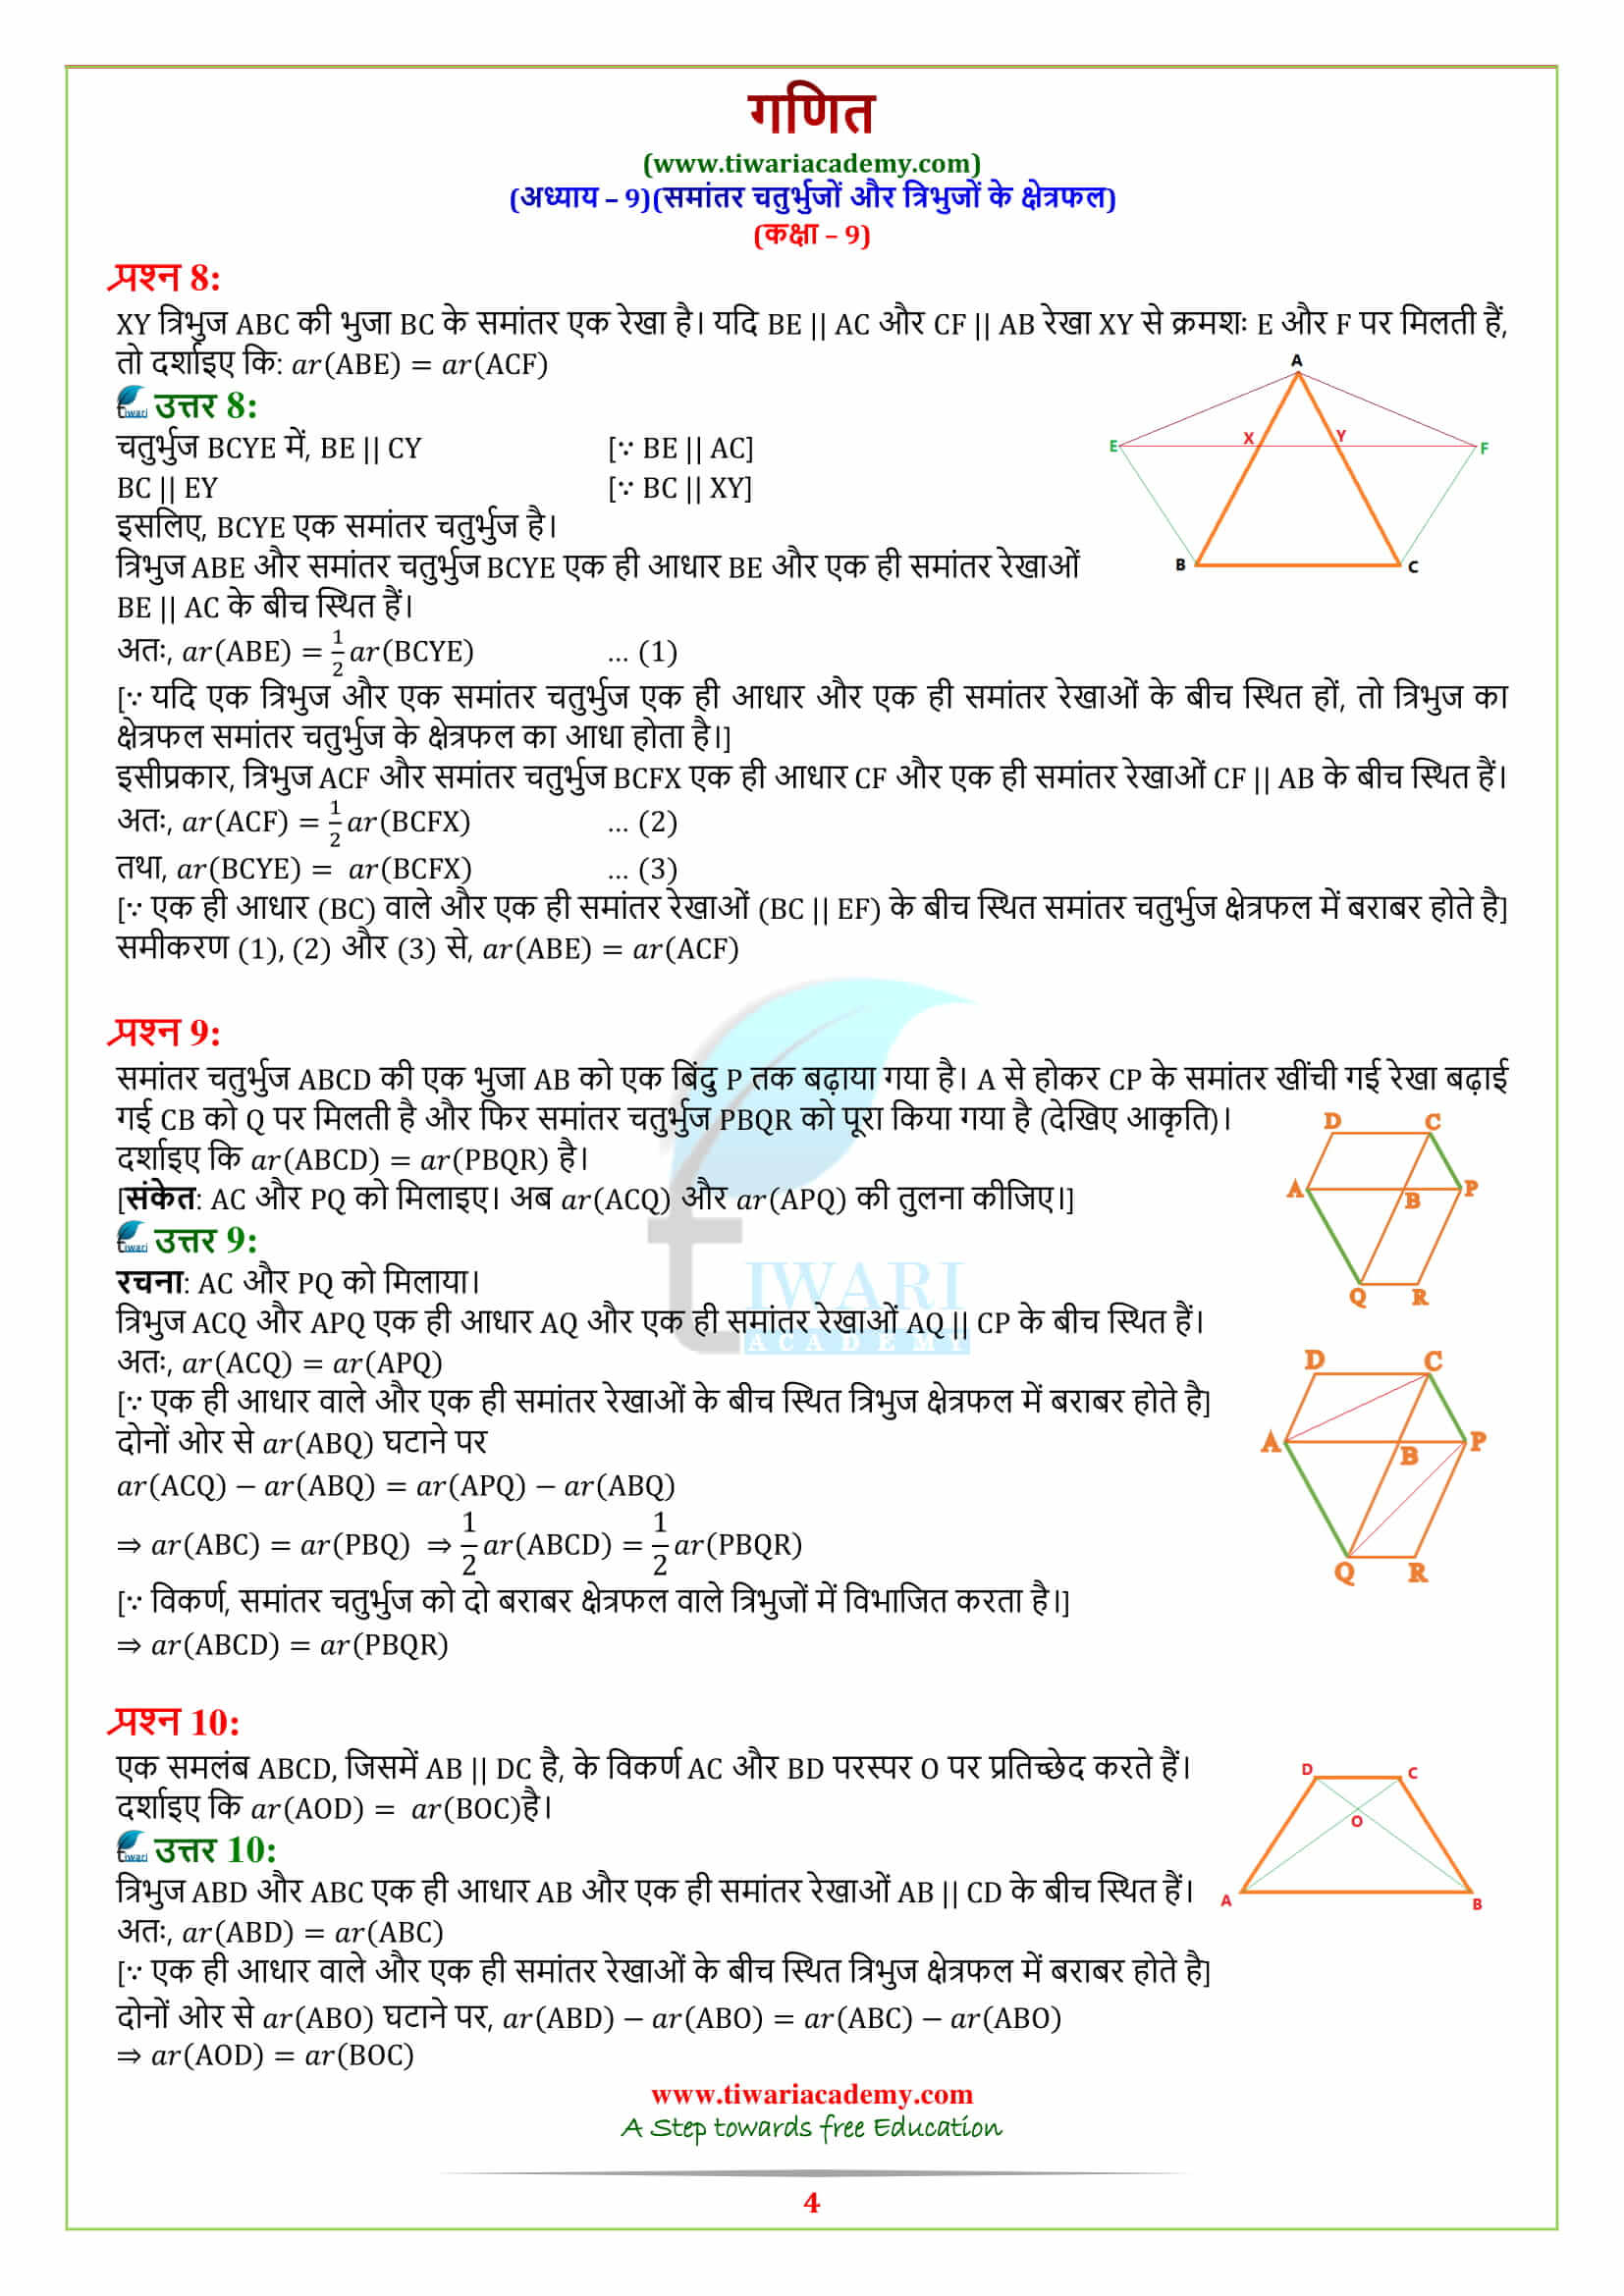 9 Maths Exercise 9.3 question 1, 2, 3,, 4, 5, 6, 7, 8, 9, 10